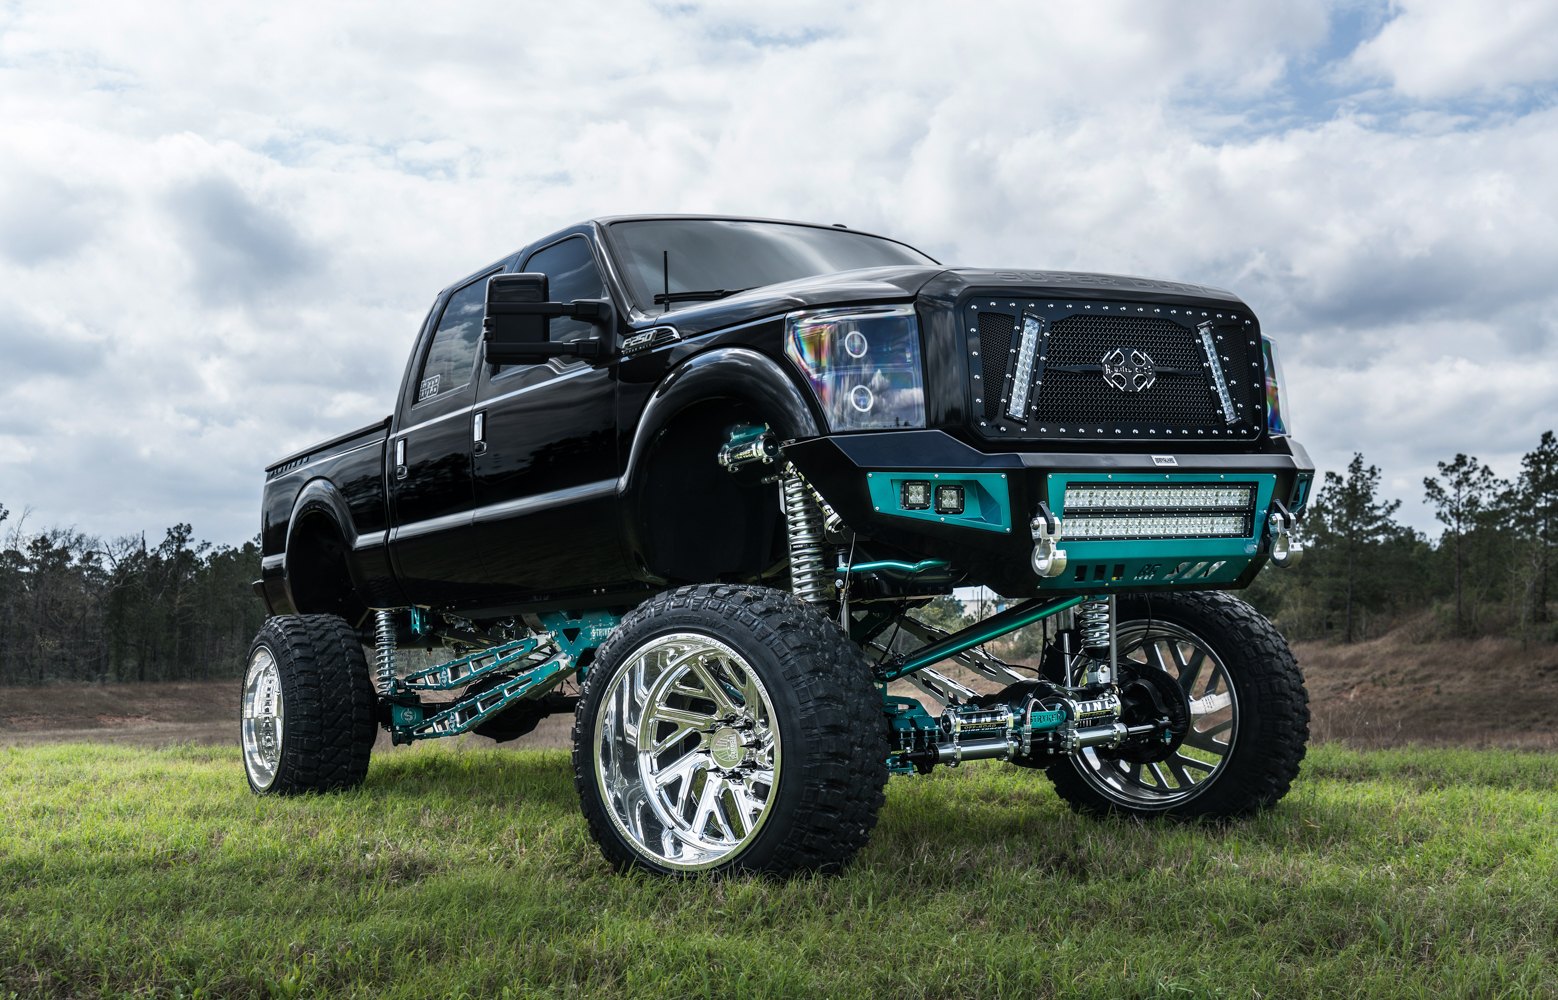 Lifted Ford F250 With Chrome Wheels - Photo by Dale Martin